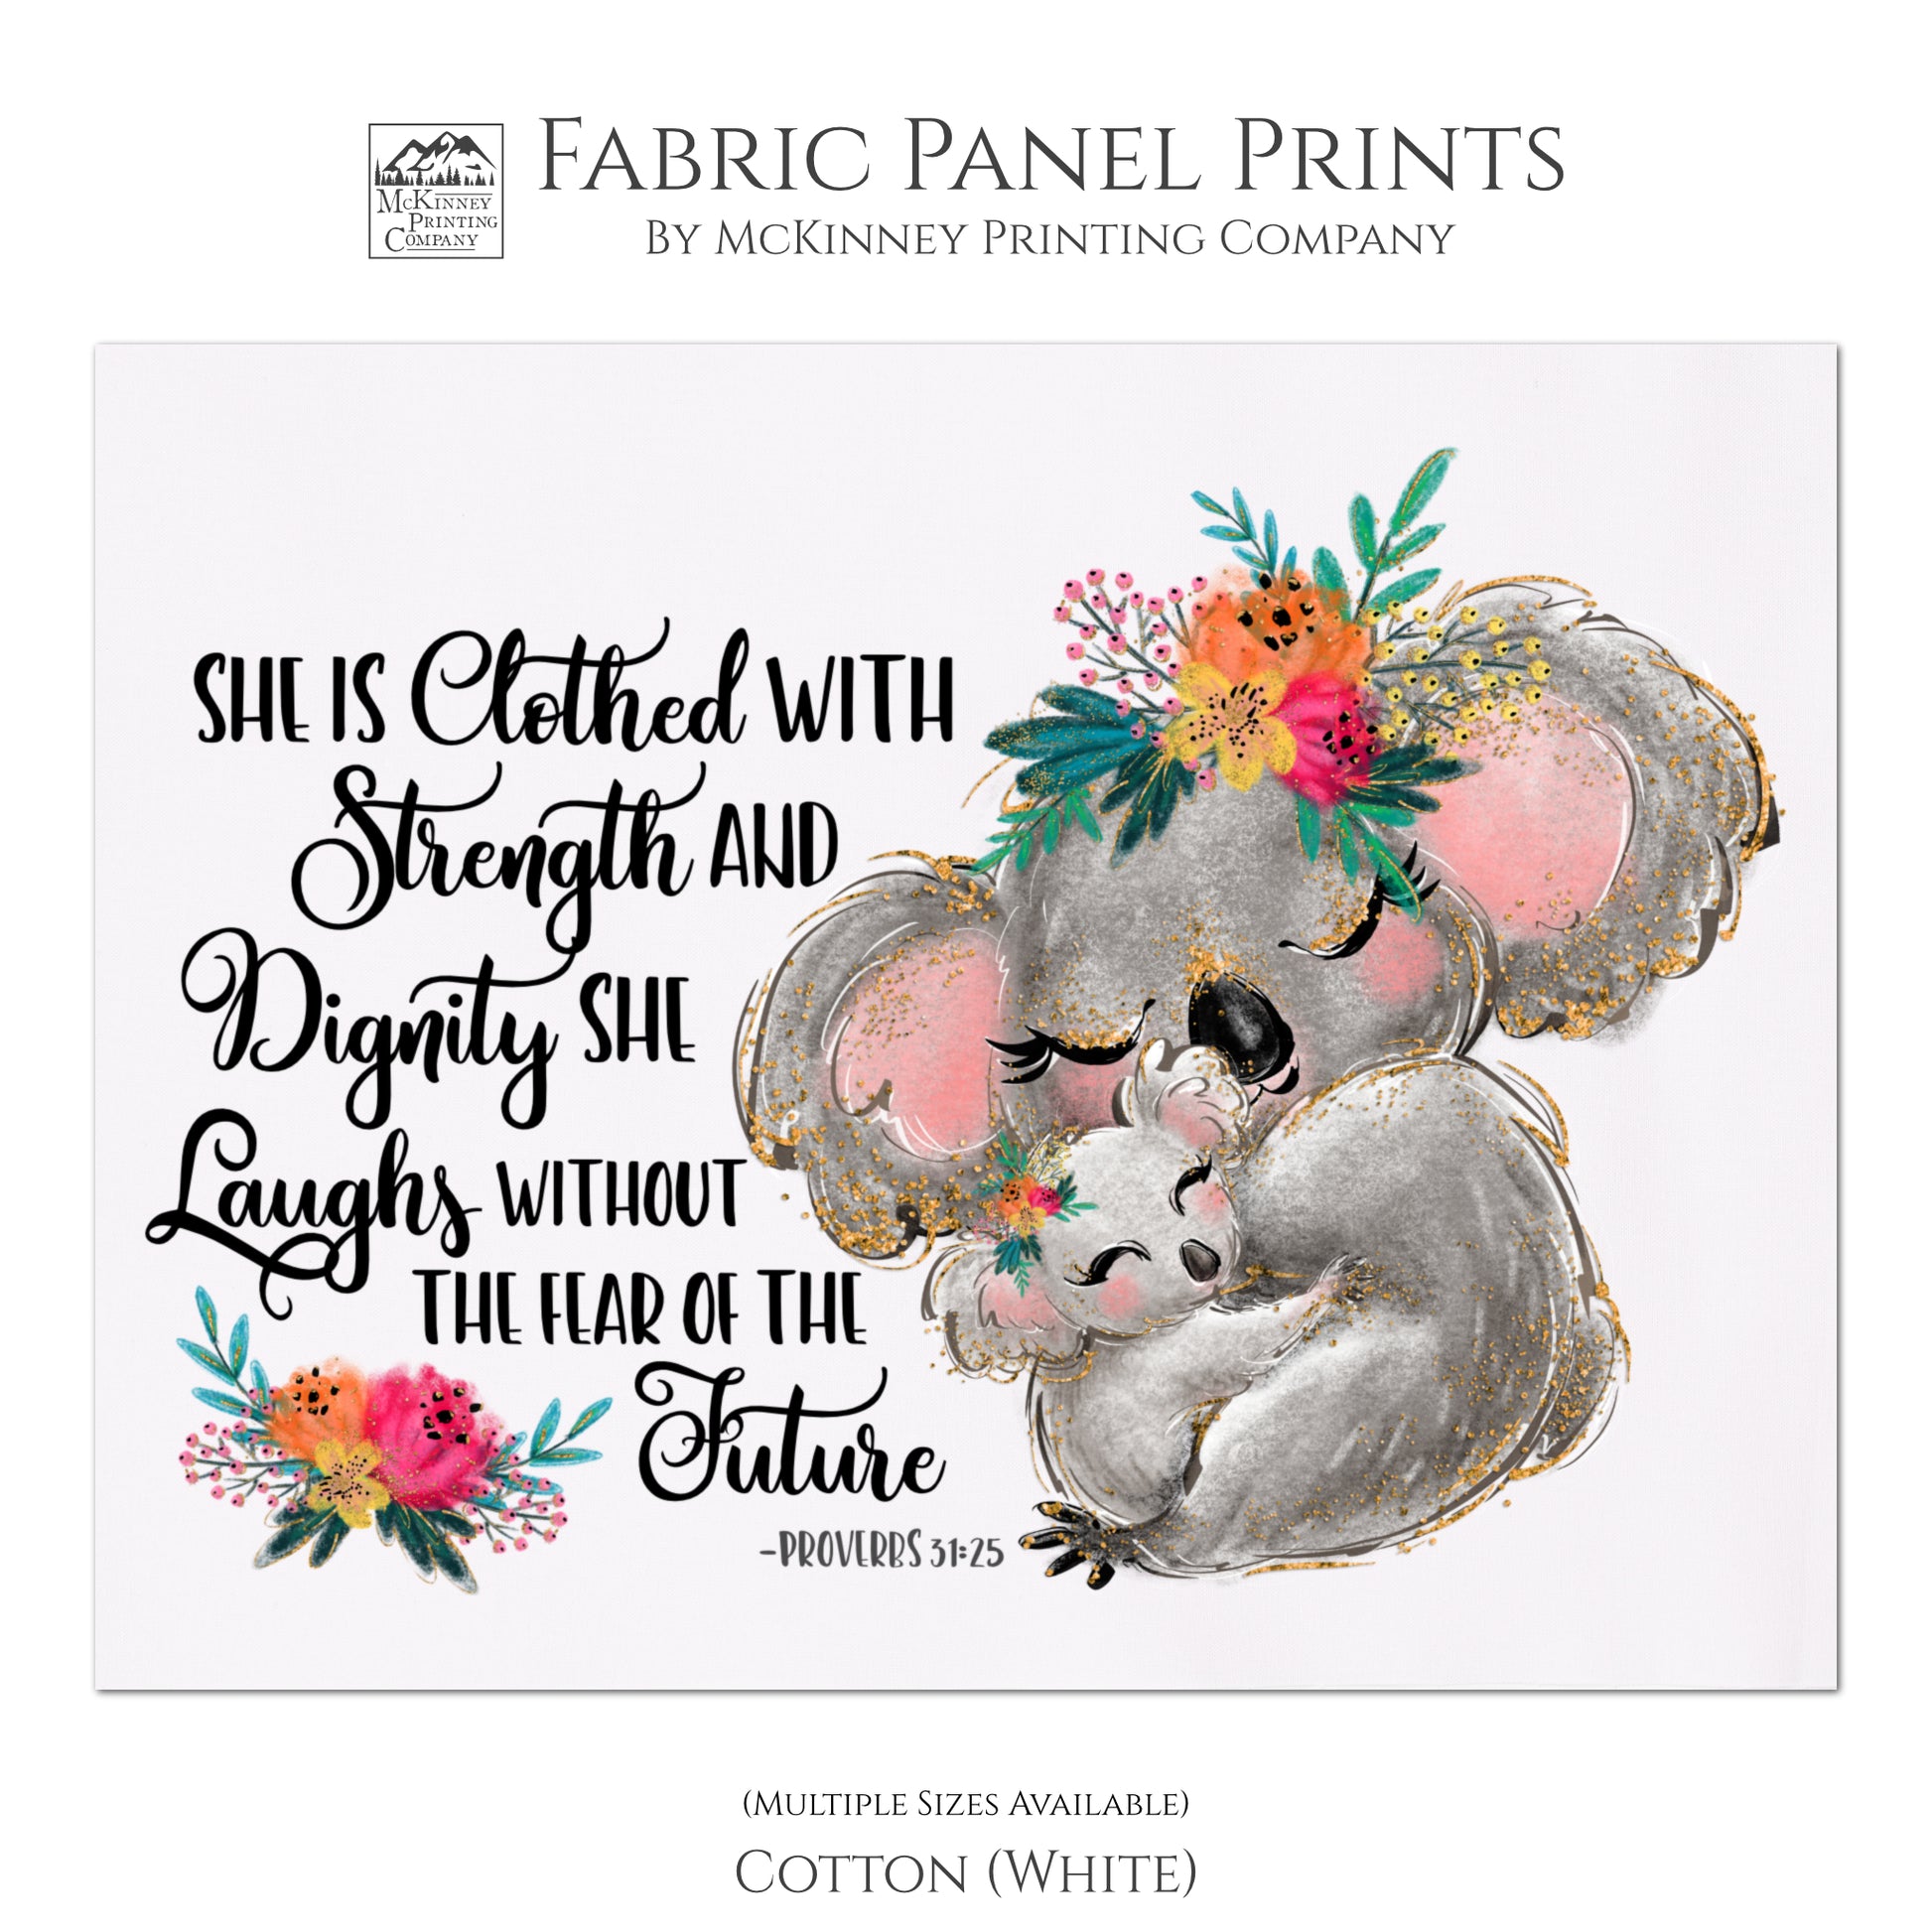 She is clothed with strength and dignity, she laughs without the fear of the future. - Proverbs 31:25 - Baby Fabric Panels, Quilt Block, Fabric Panel Print - Cotton, White